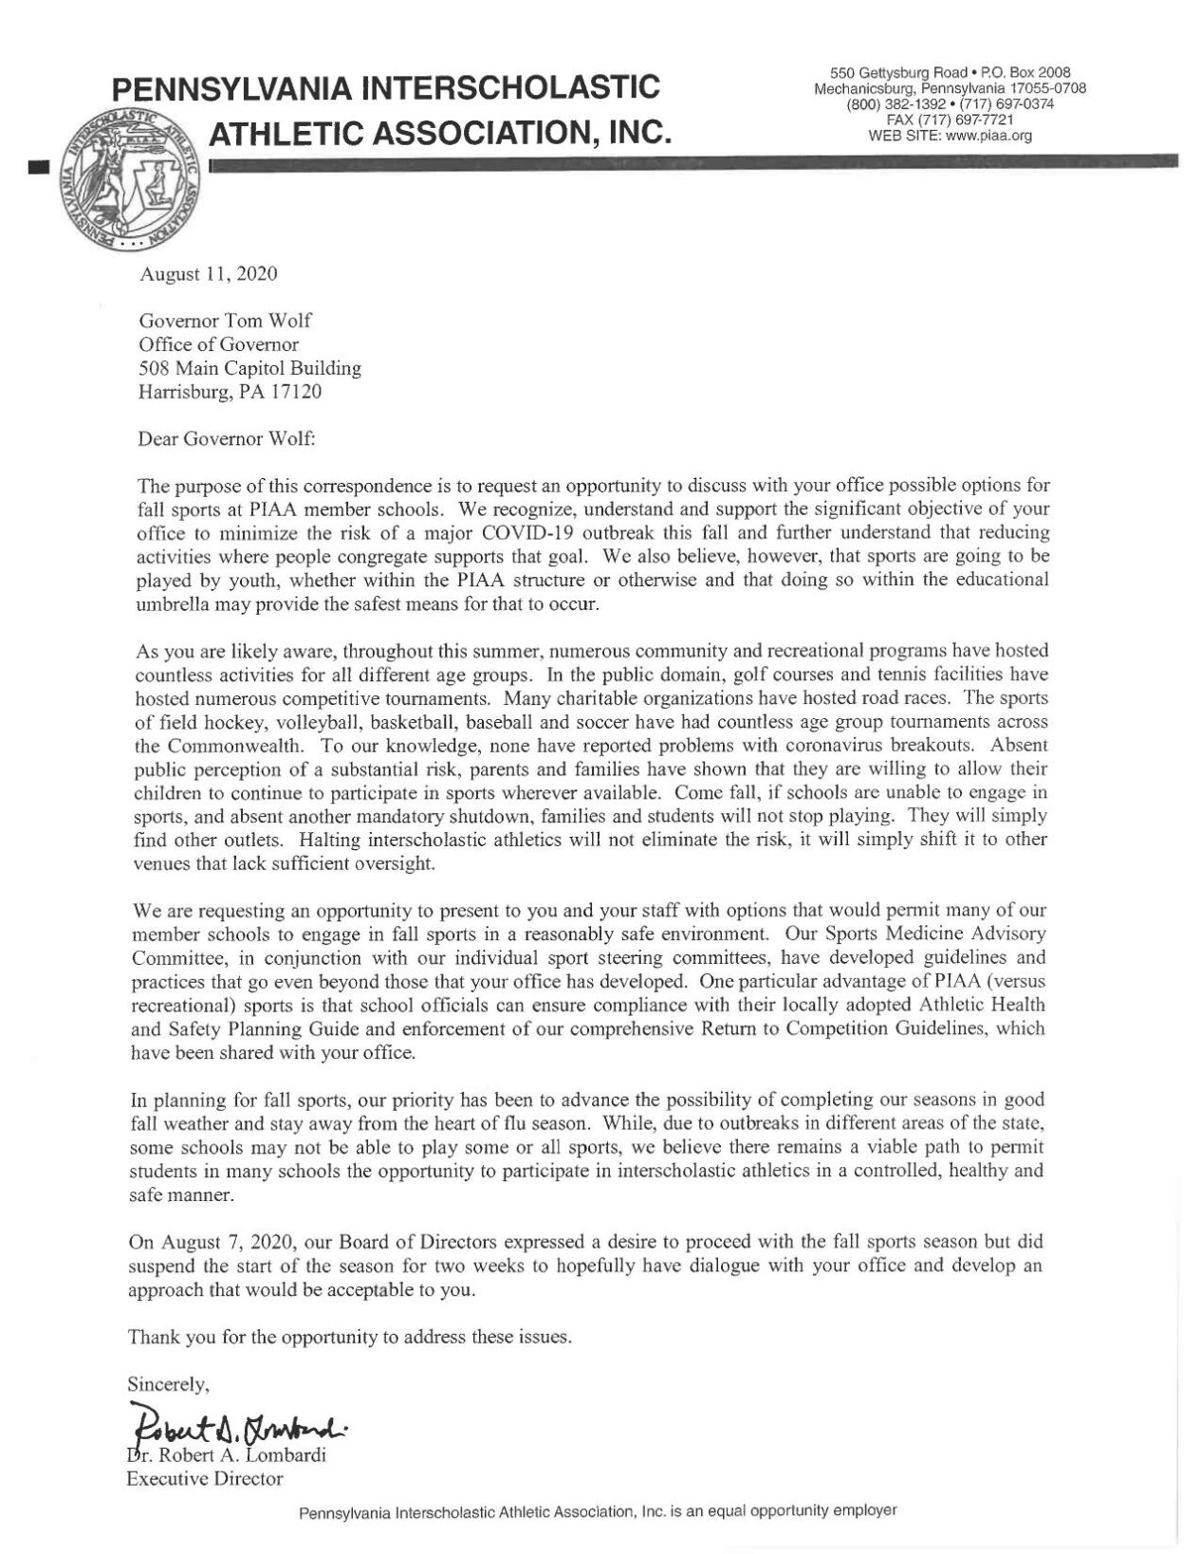 PIAA Letter to Governor Wolf